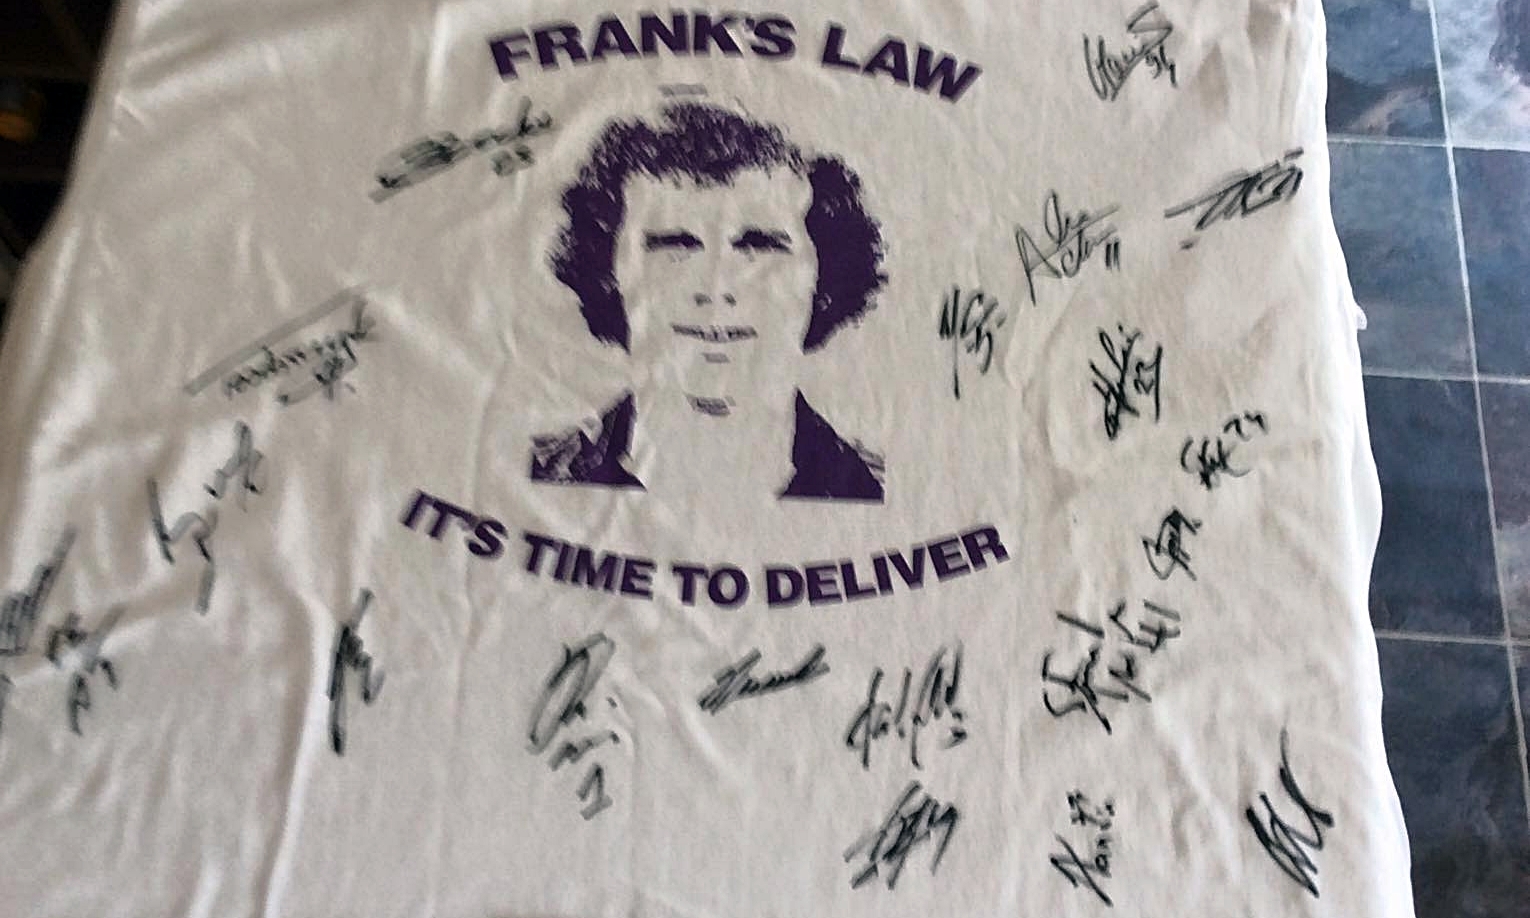 The Frank's Law T-shirt signed by the Anderlecht squad.